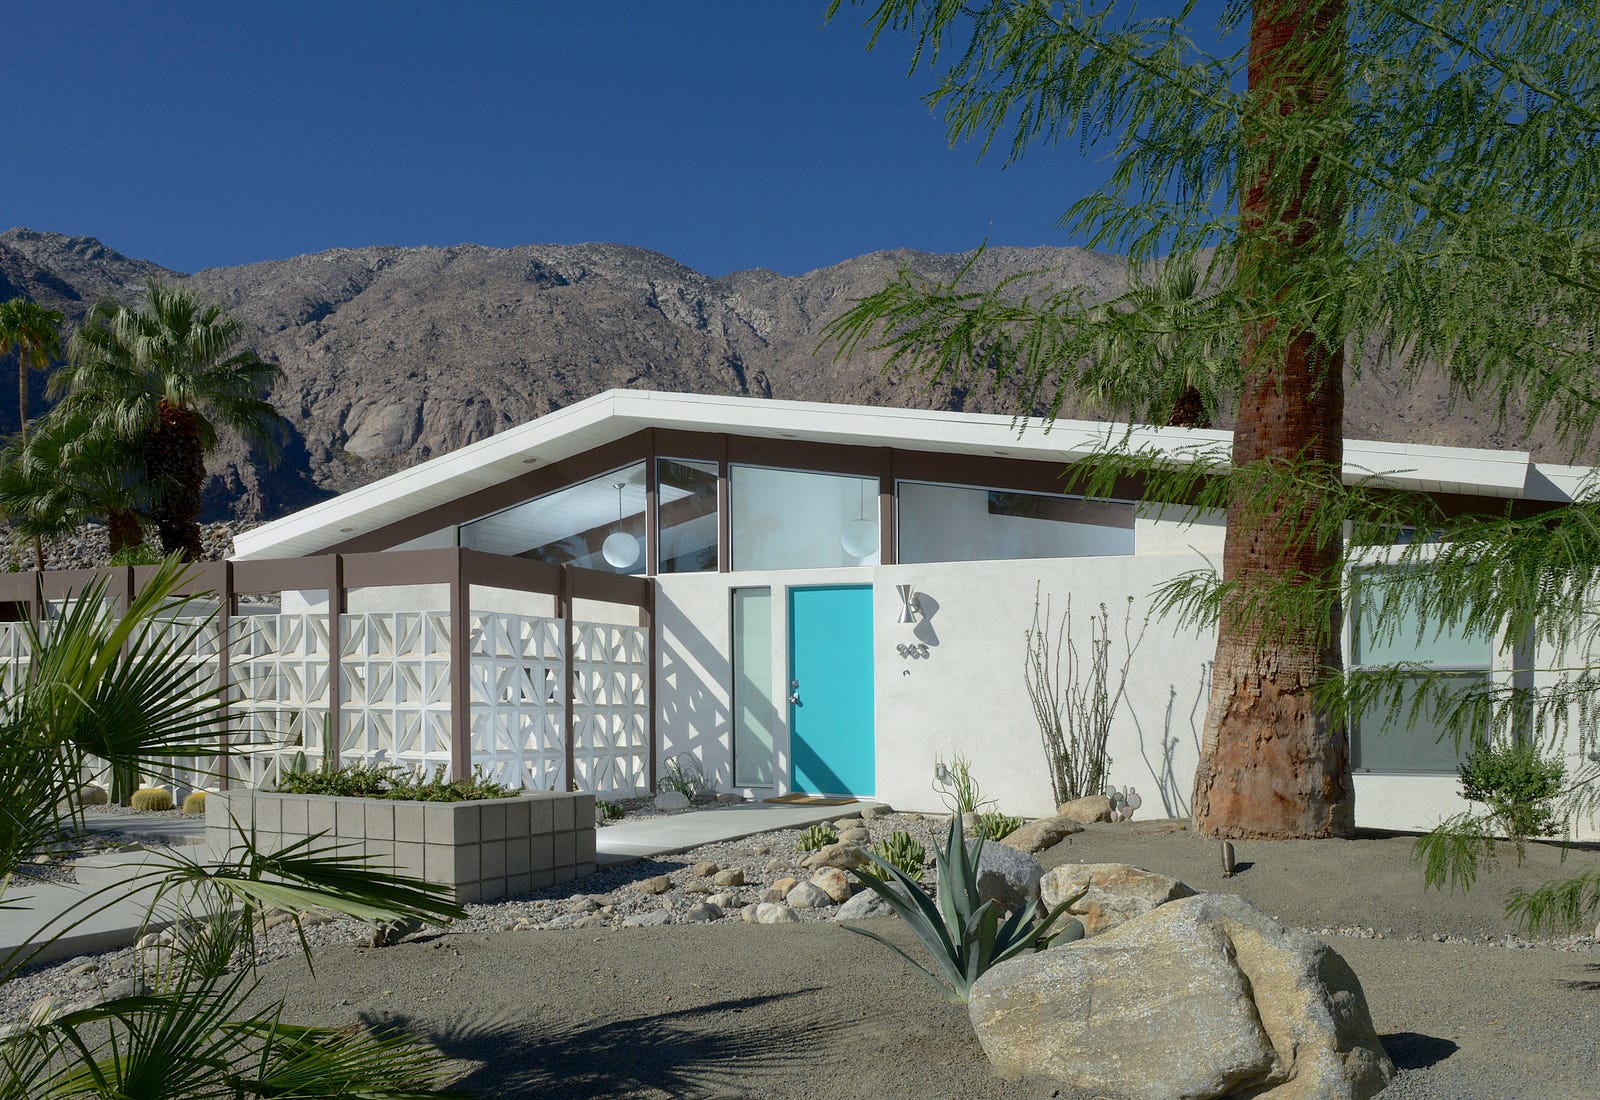 These Are the Must-Attend Events of Modernism Week in Palm Springs